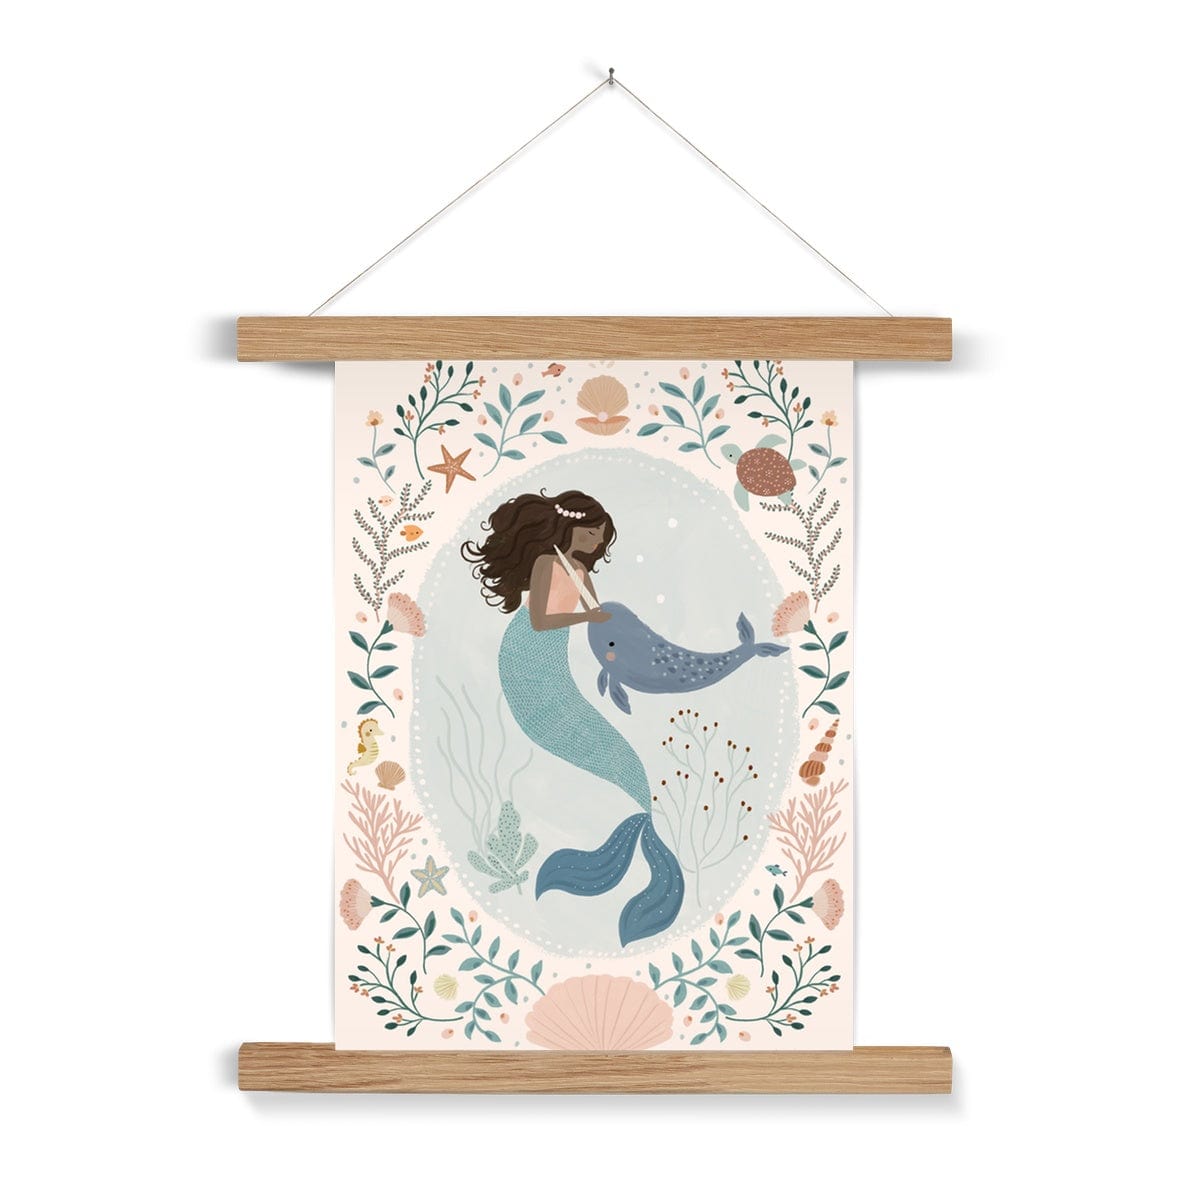 Beautiful dark skinned and haired mermaid with a pearl headband petting her friend Narwhal within a pale teal coloured oval background with white dots round the edge. On the outside of the oval is a sea themed border on a neutral background. The border consists of foliage, flowers and items you would find at the bottom of the sea, shells, turtle, sea horse with a large clam shell at the bottom, hanging from a nail in a natural wooden hanger